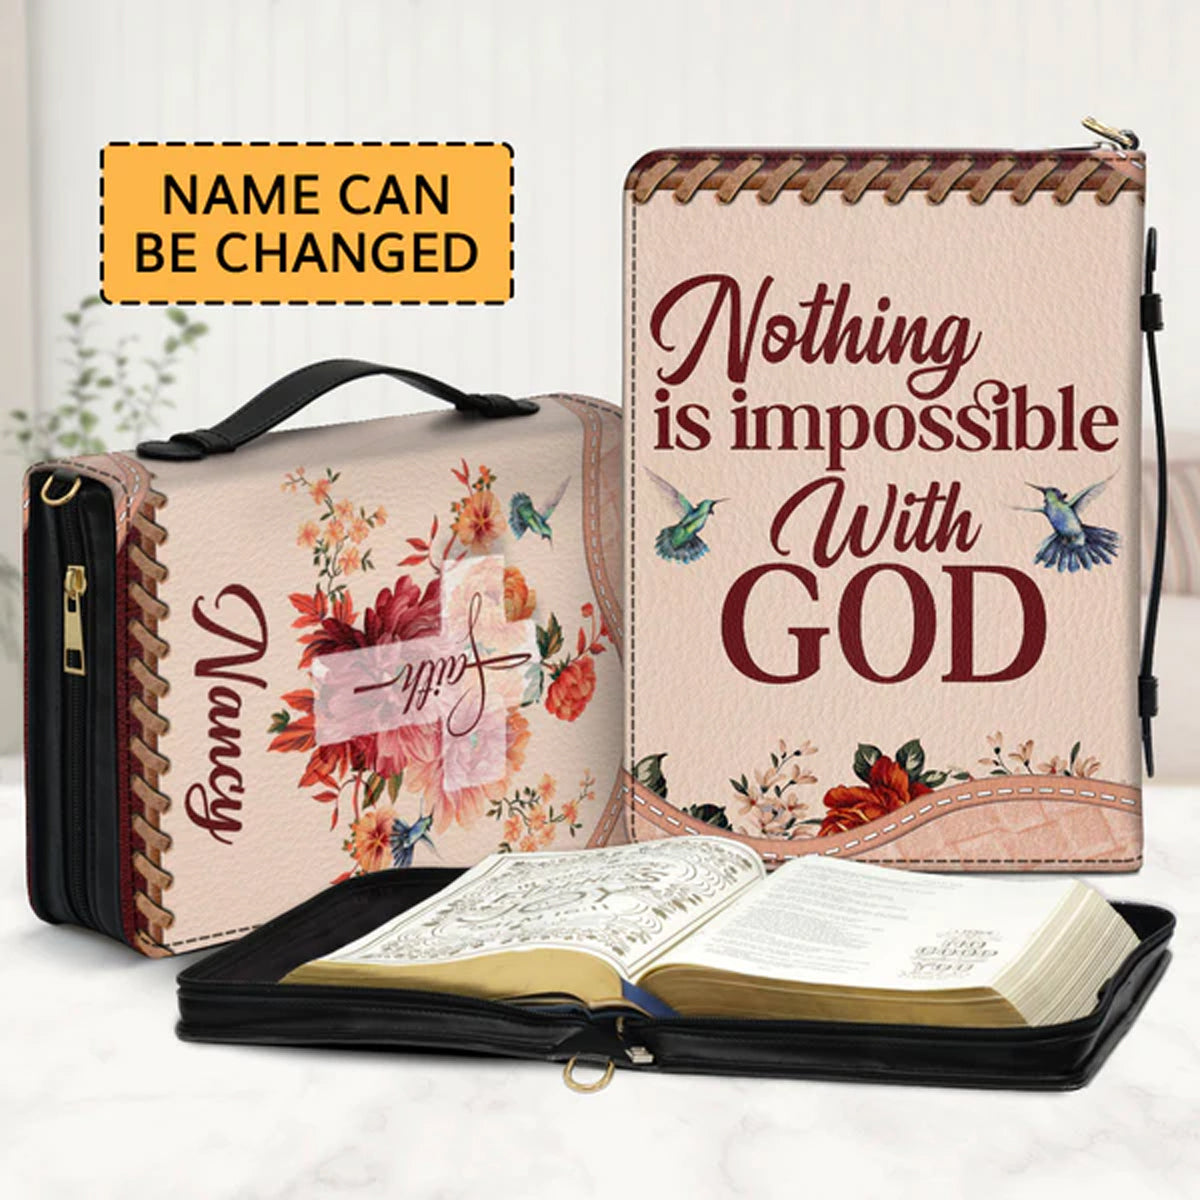 Christianartbag Bible Cover, Nothing Is Impossible With God Bible Cover, Personalized Bible Cover, Gifts For Women, Christmas Gift, CABBBCV01090823. - Christian Art Bag